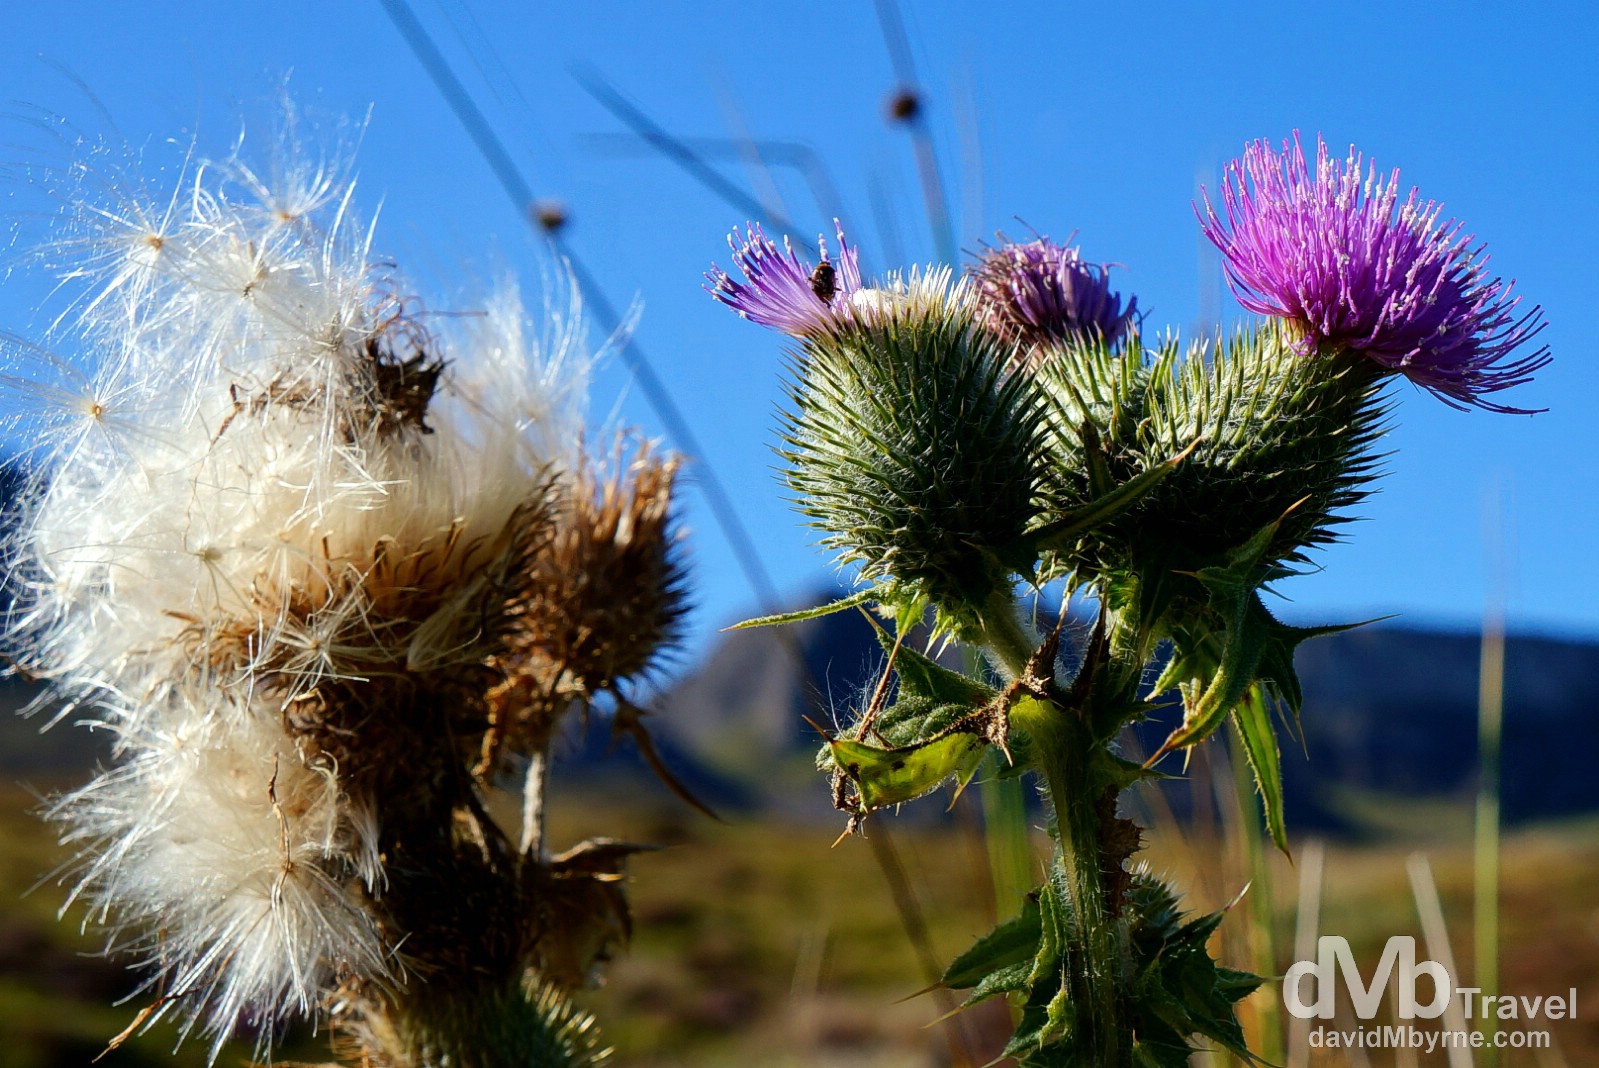 A thistle, a Scottish icon, at the tip of the Trotternish Peninsula on the Isle of Skye, Scotland. September 17, 2014.